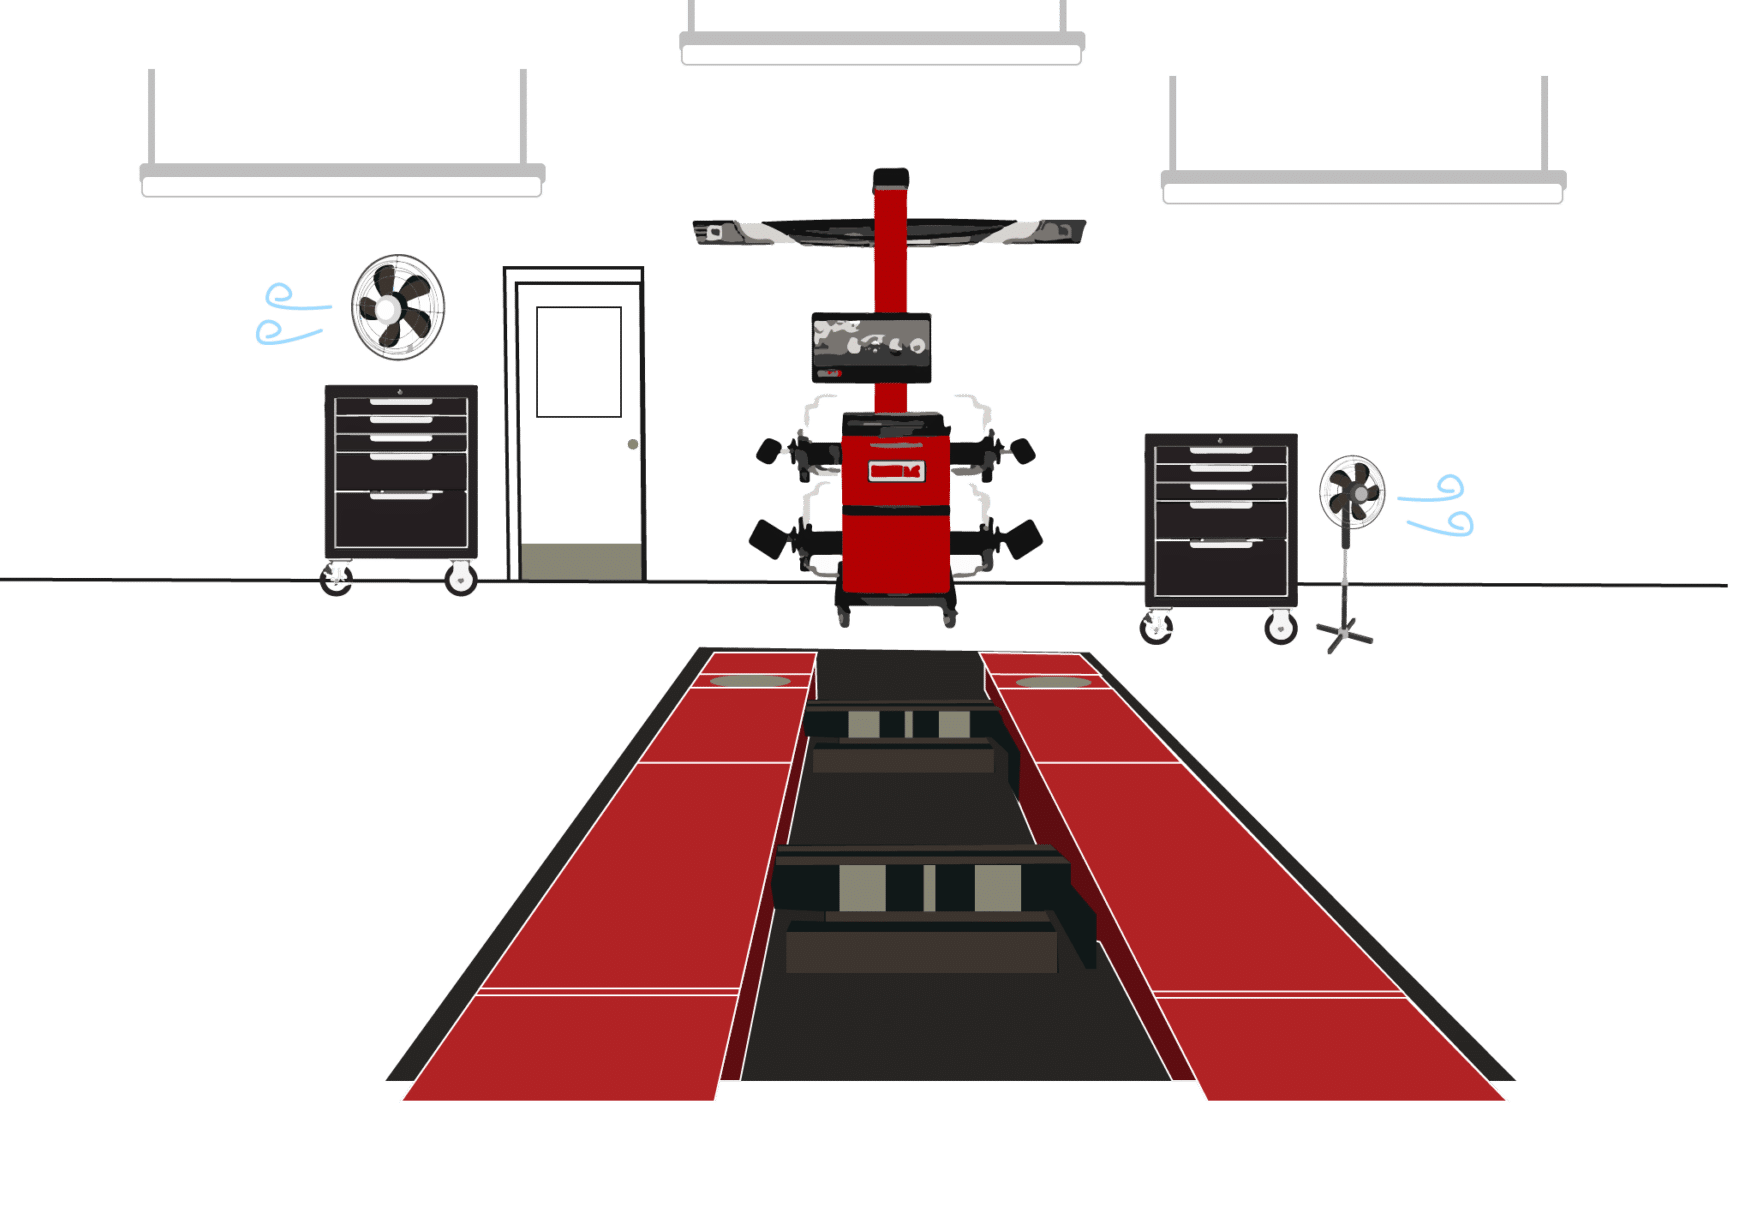 Vector drawing of a Coats Aligner in front of a red, empty, surface mount alignment rack in a shop.